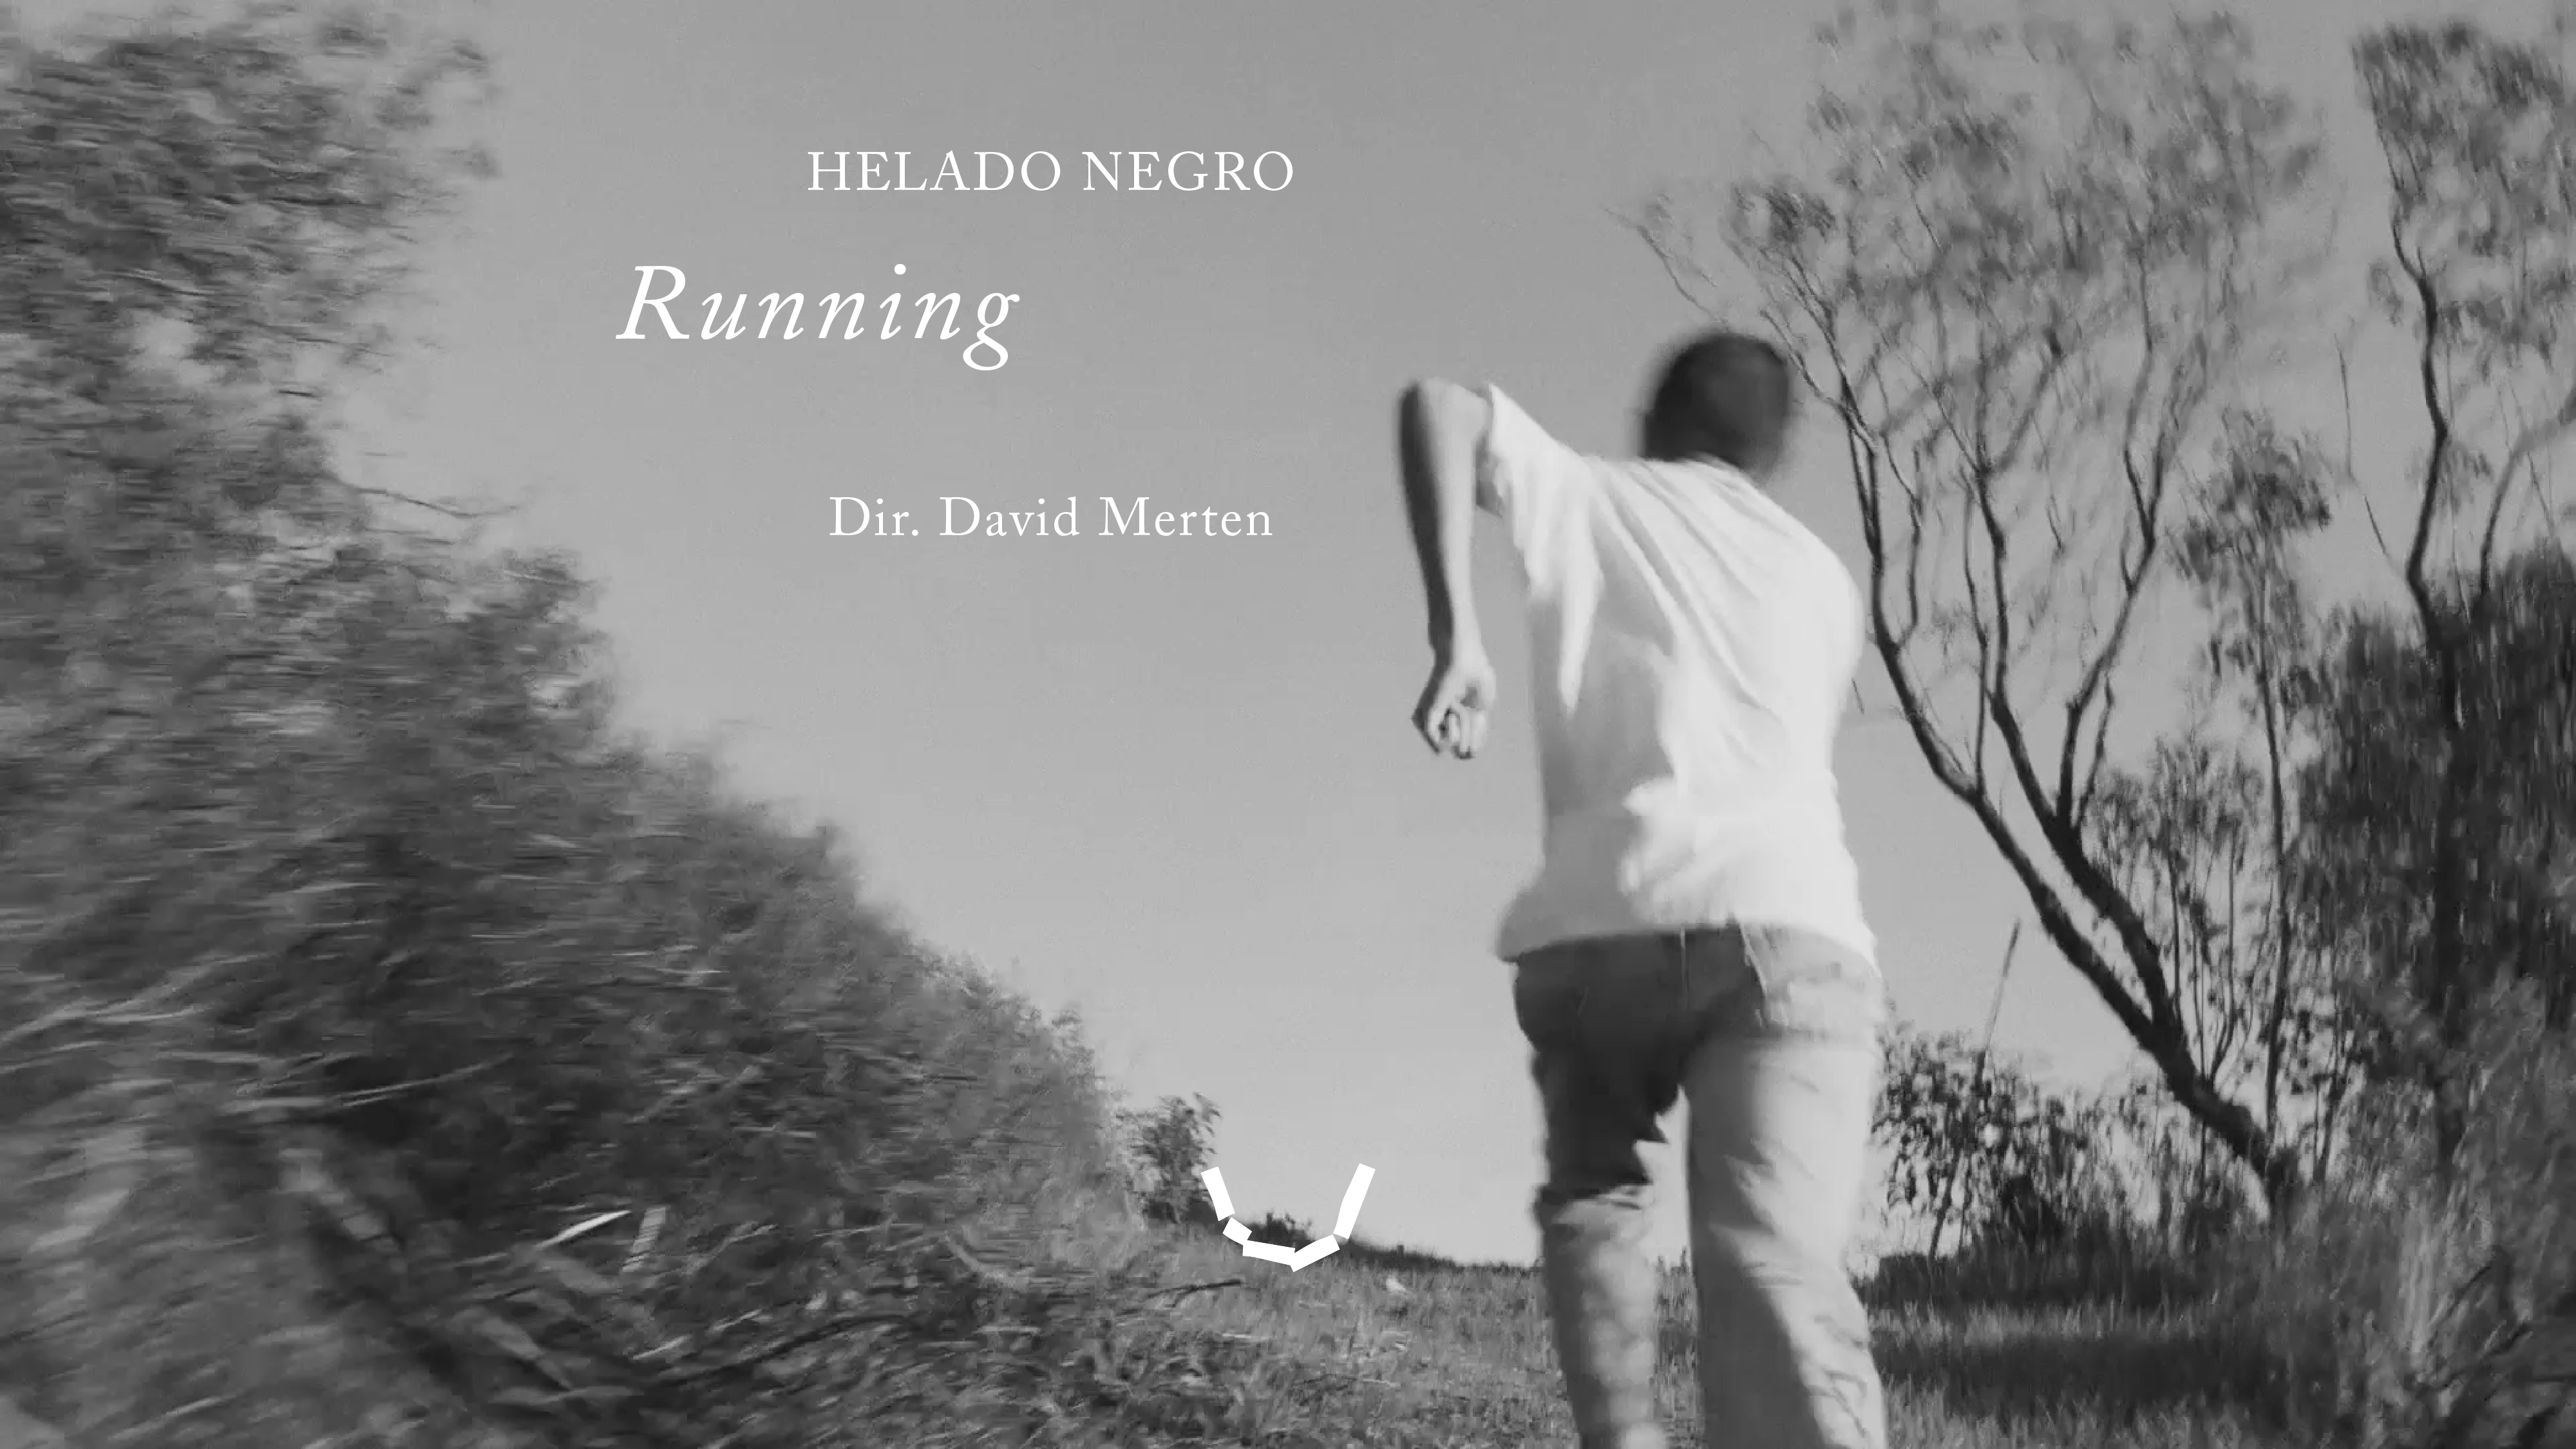 Link to Video for Helado Negro – Running